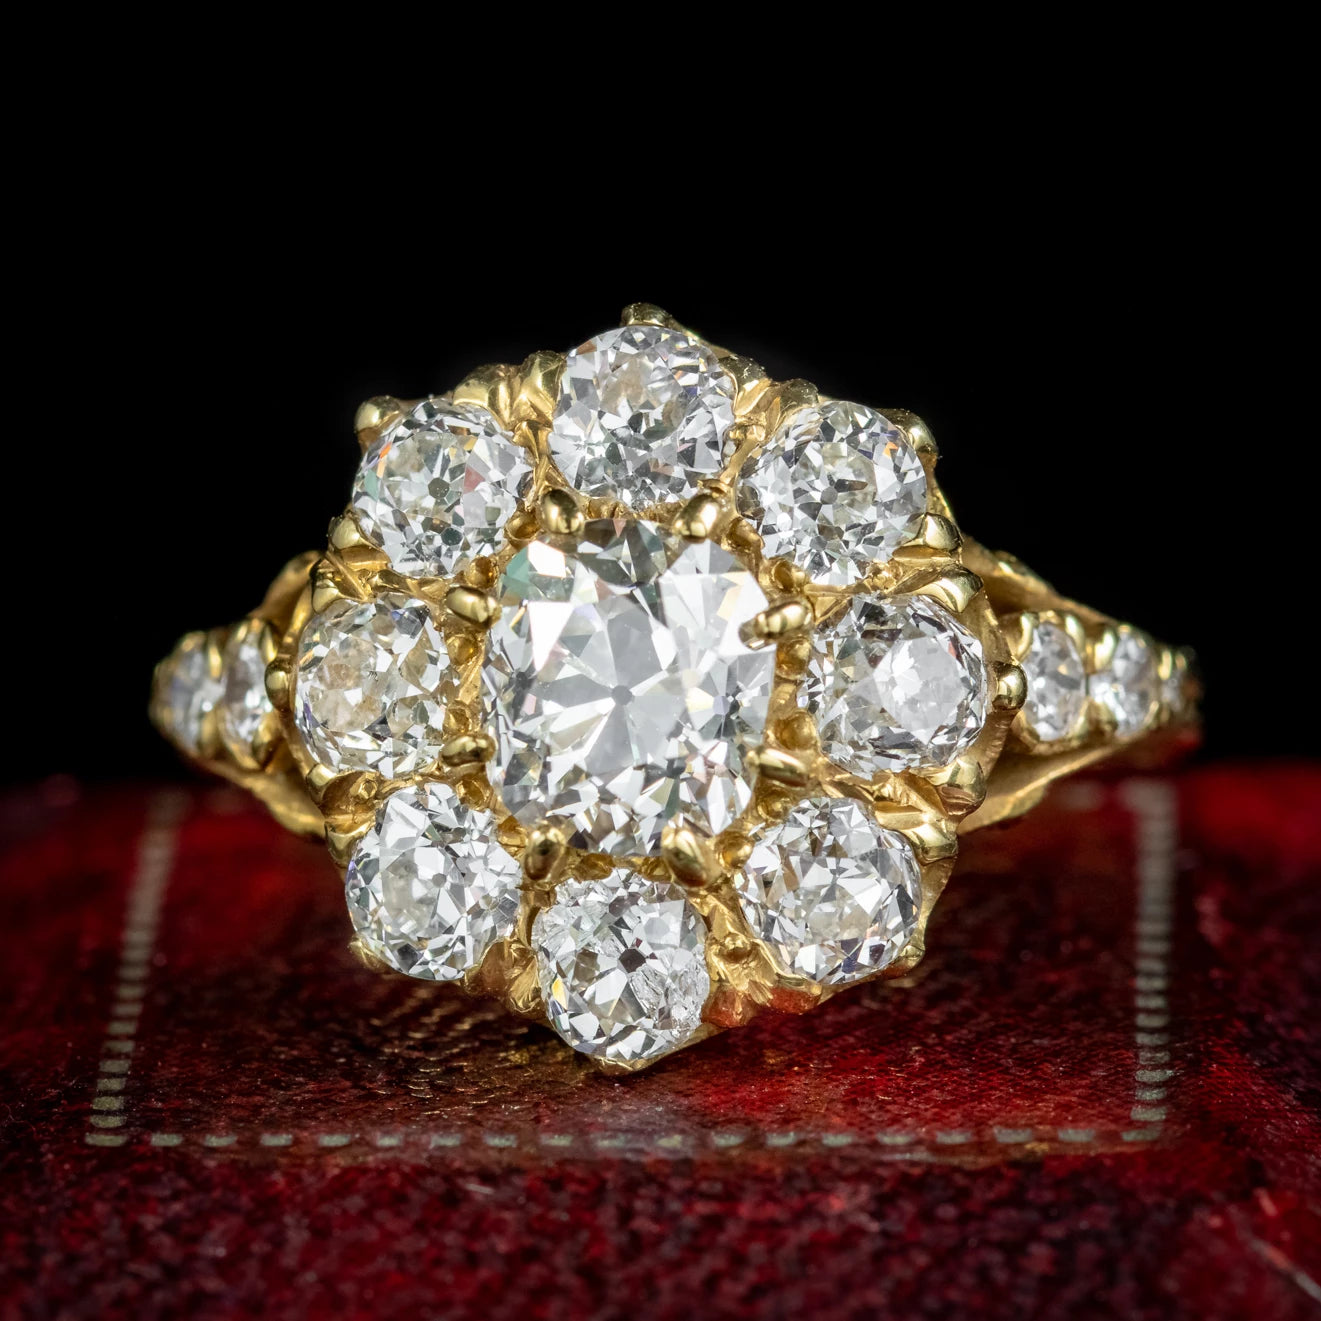 Antique Gold Engagement Ring